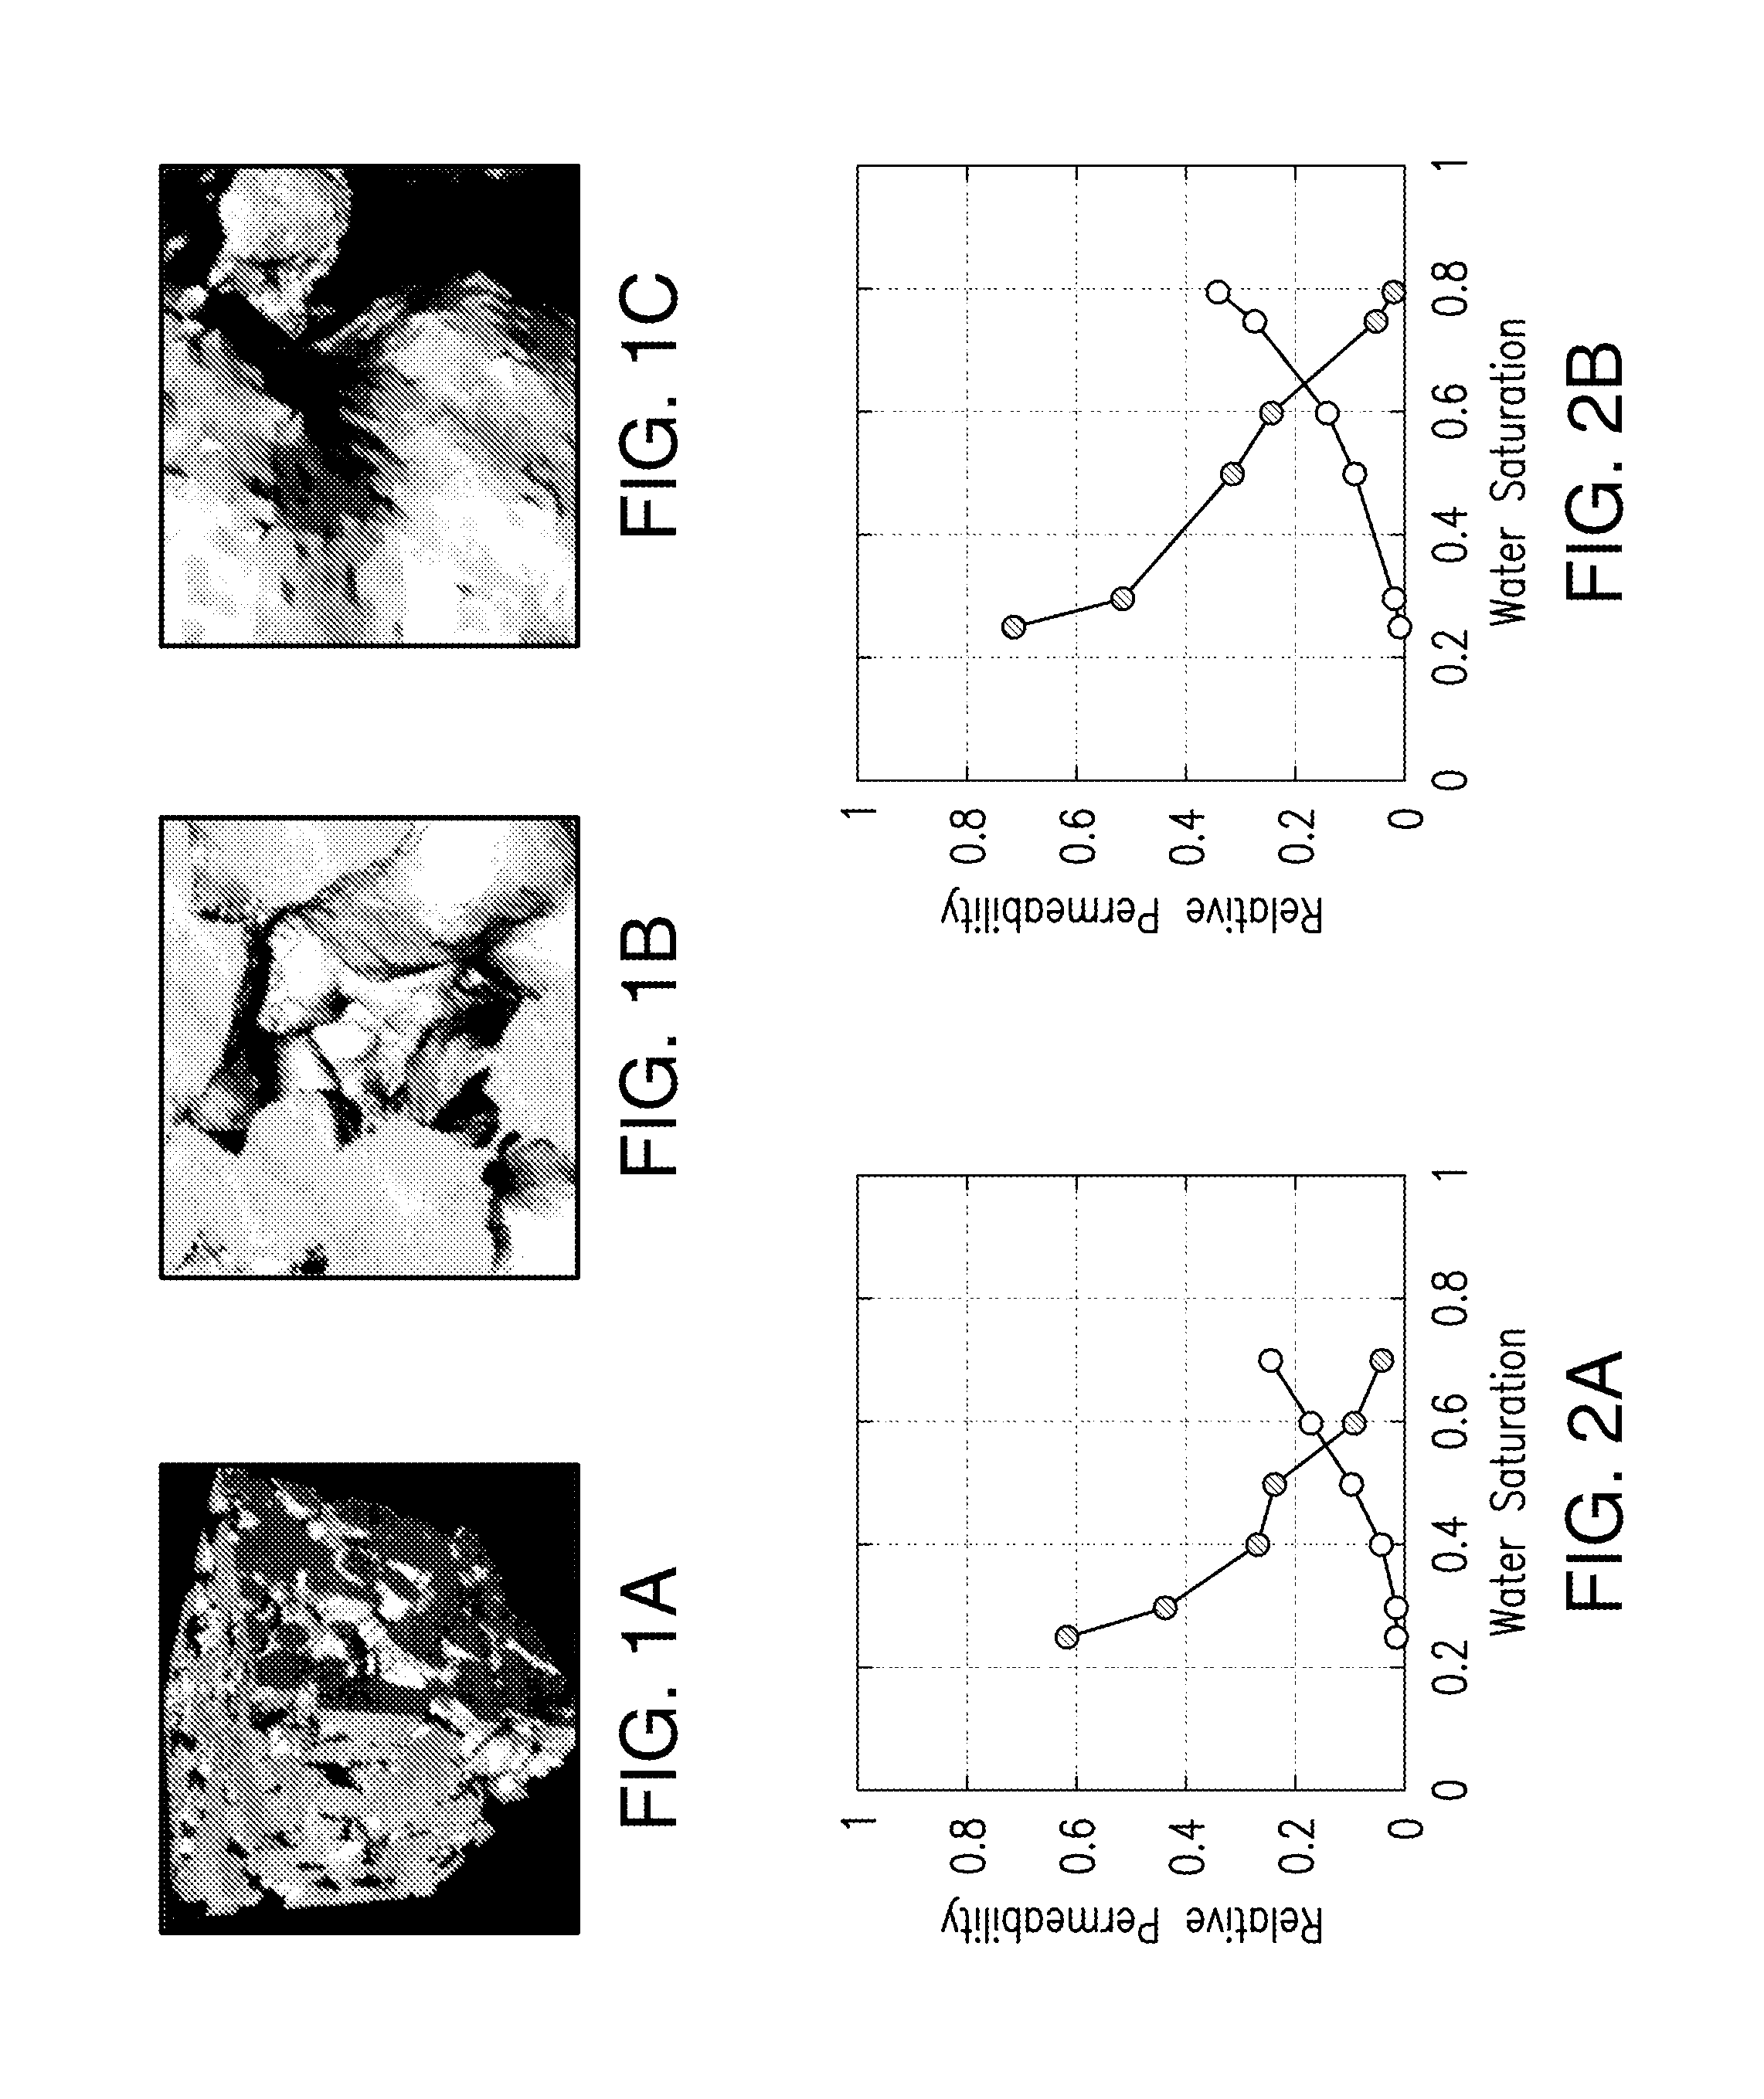 Method and system for integrating logging tool data and digital rock physics to estimate rock formation properties